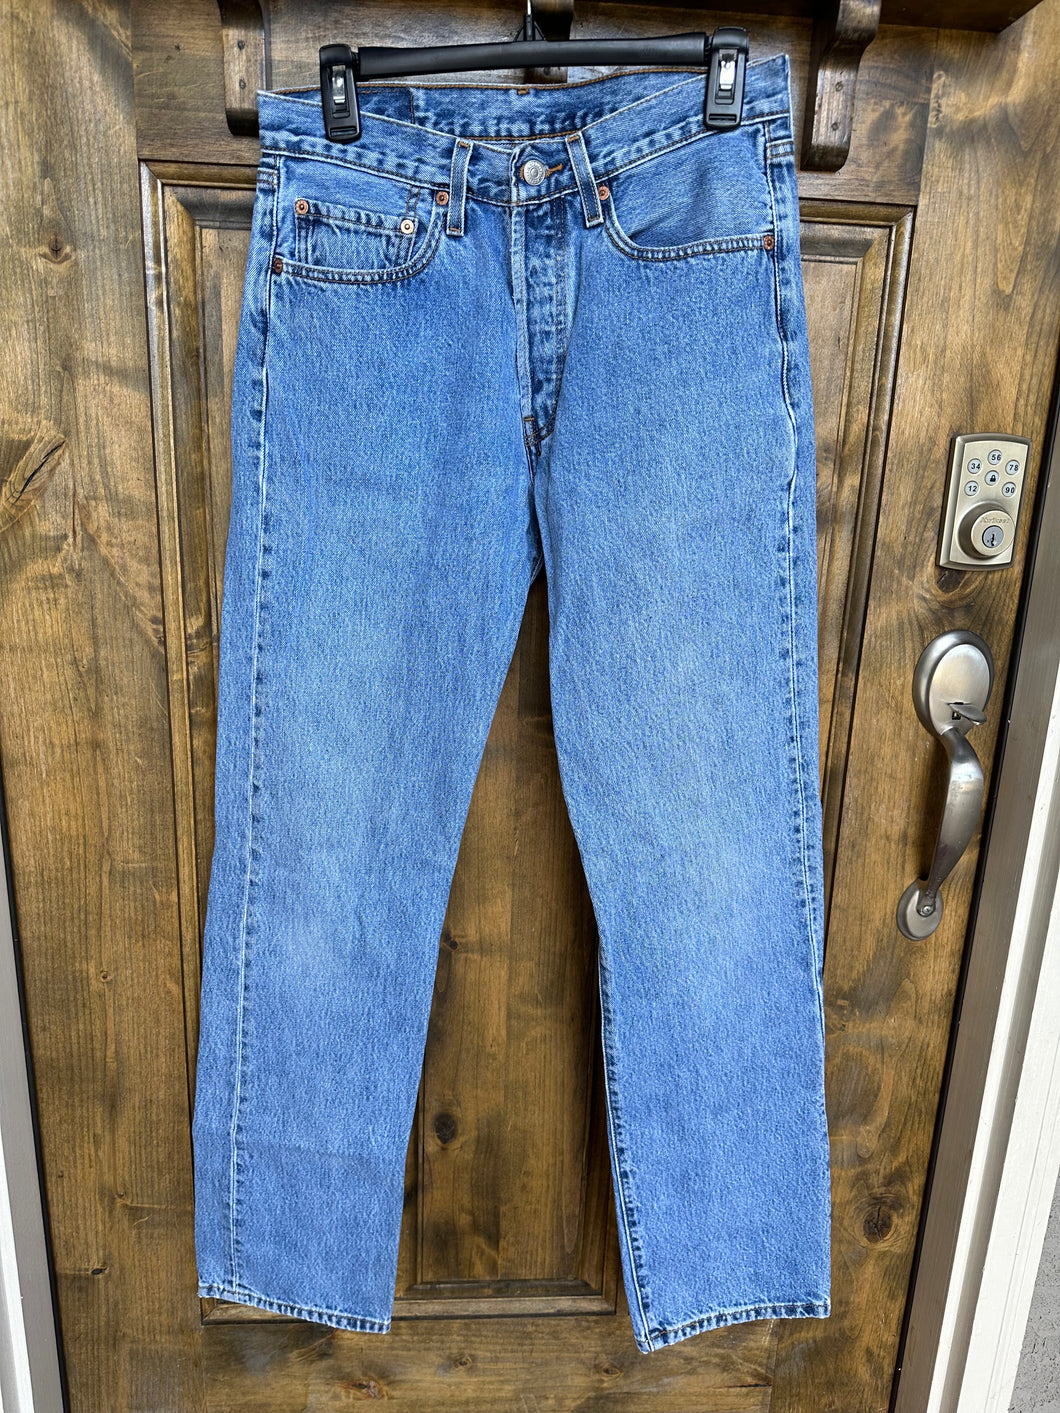 Early 2000s Levi’s 501